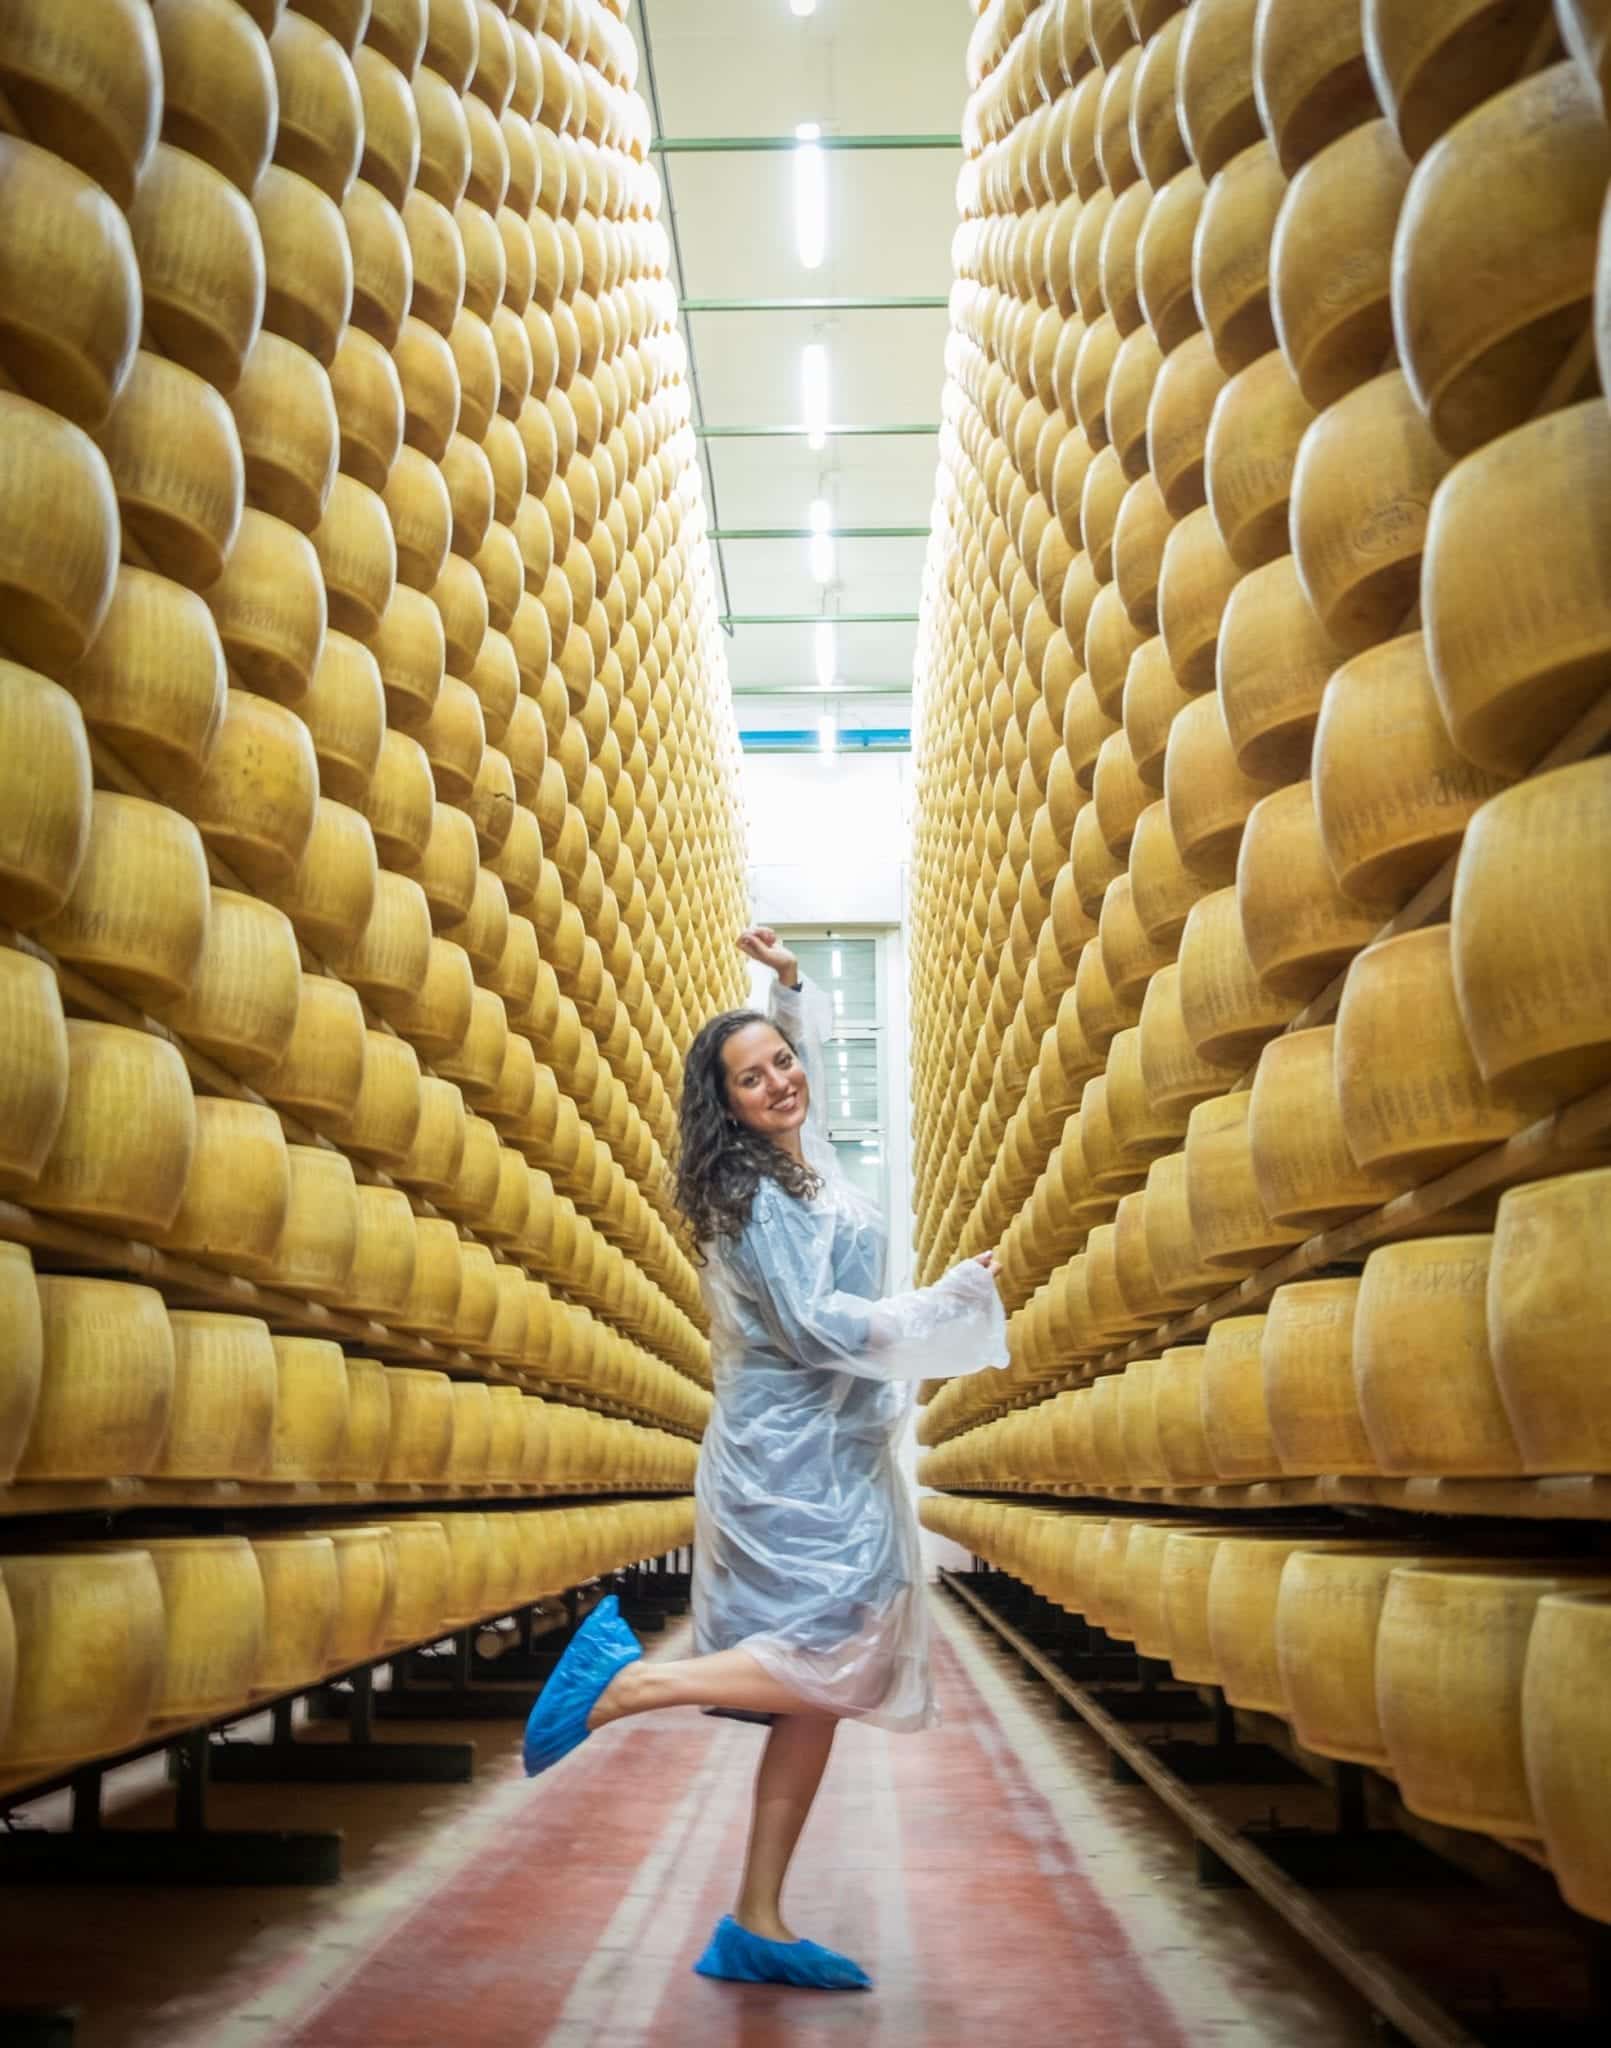 Kate poses with one foot in the air in the middle of the aisle in the cheese factory, surrounded by rows and rows of cheese.